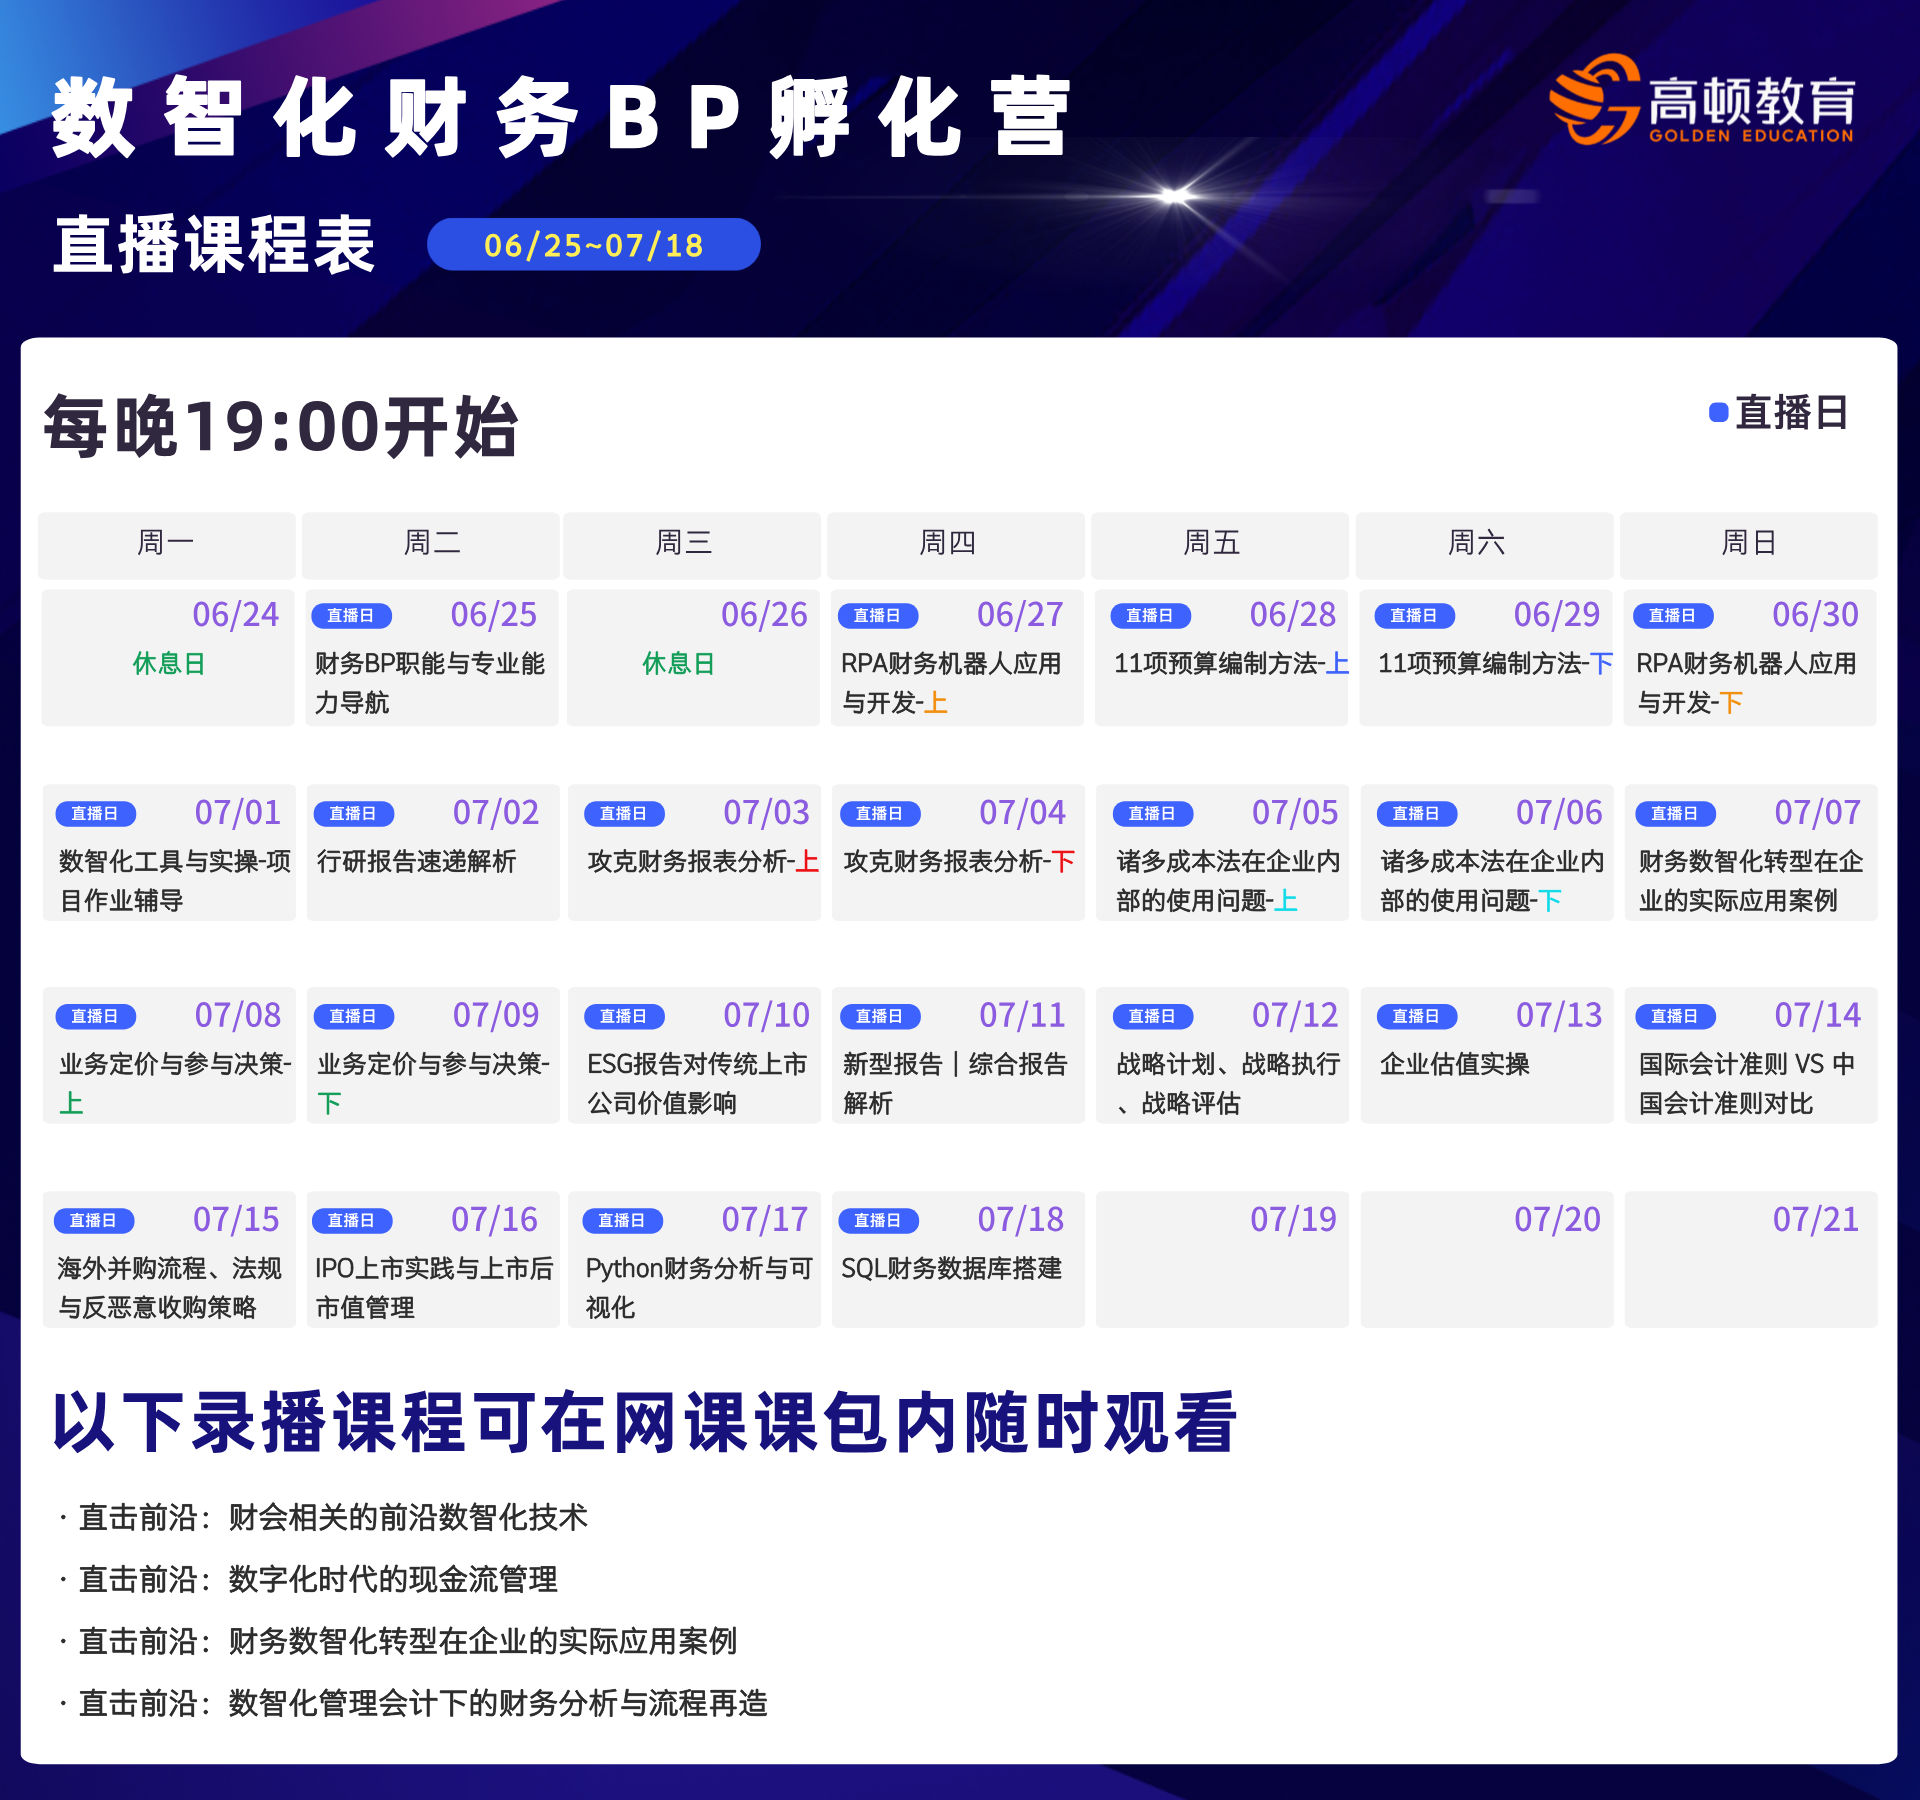 http://simg01.gaodunwangxiao.com/uploadfiles/product-center/202406/24/02bcc_20240624162455.png